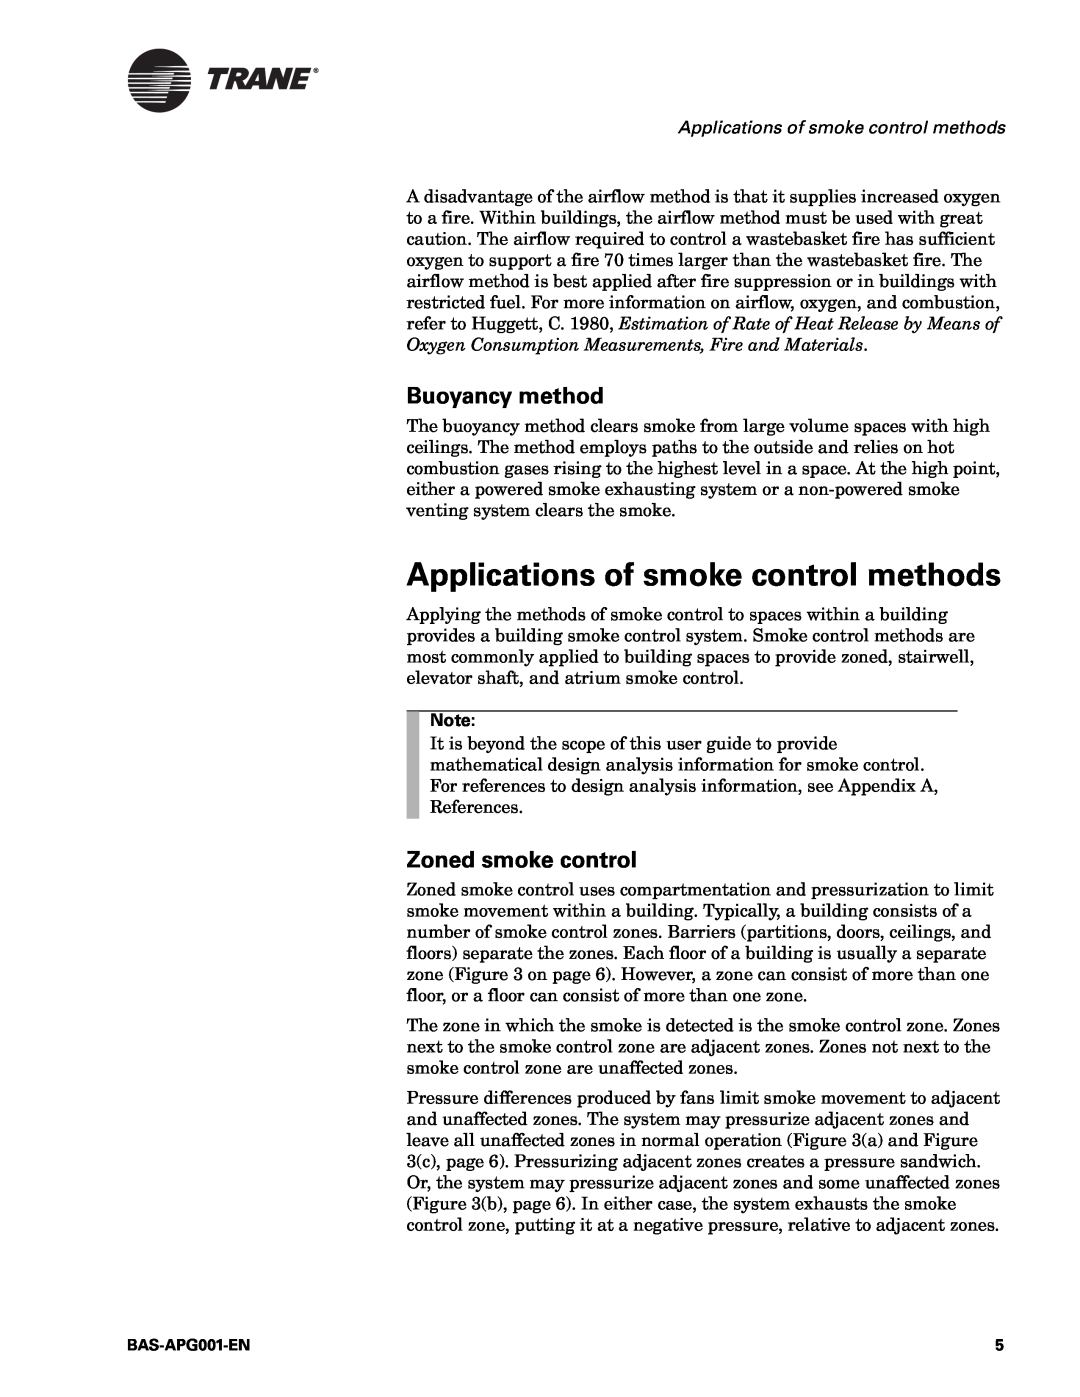 Trane Engineered Smoke Control System for Tracer Summit manual Applications of smoke control methods, Buoyancy method 